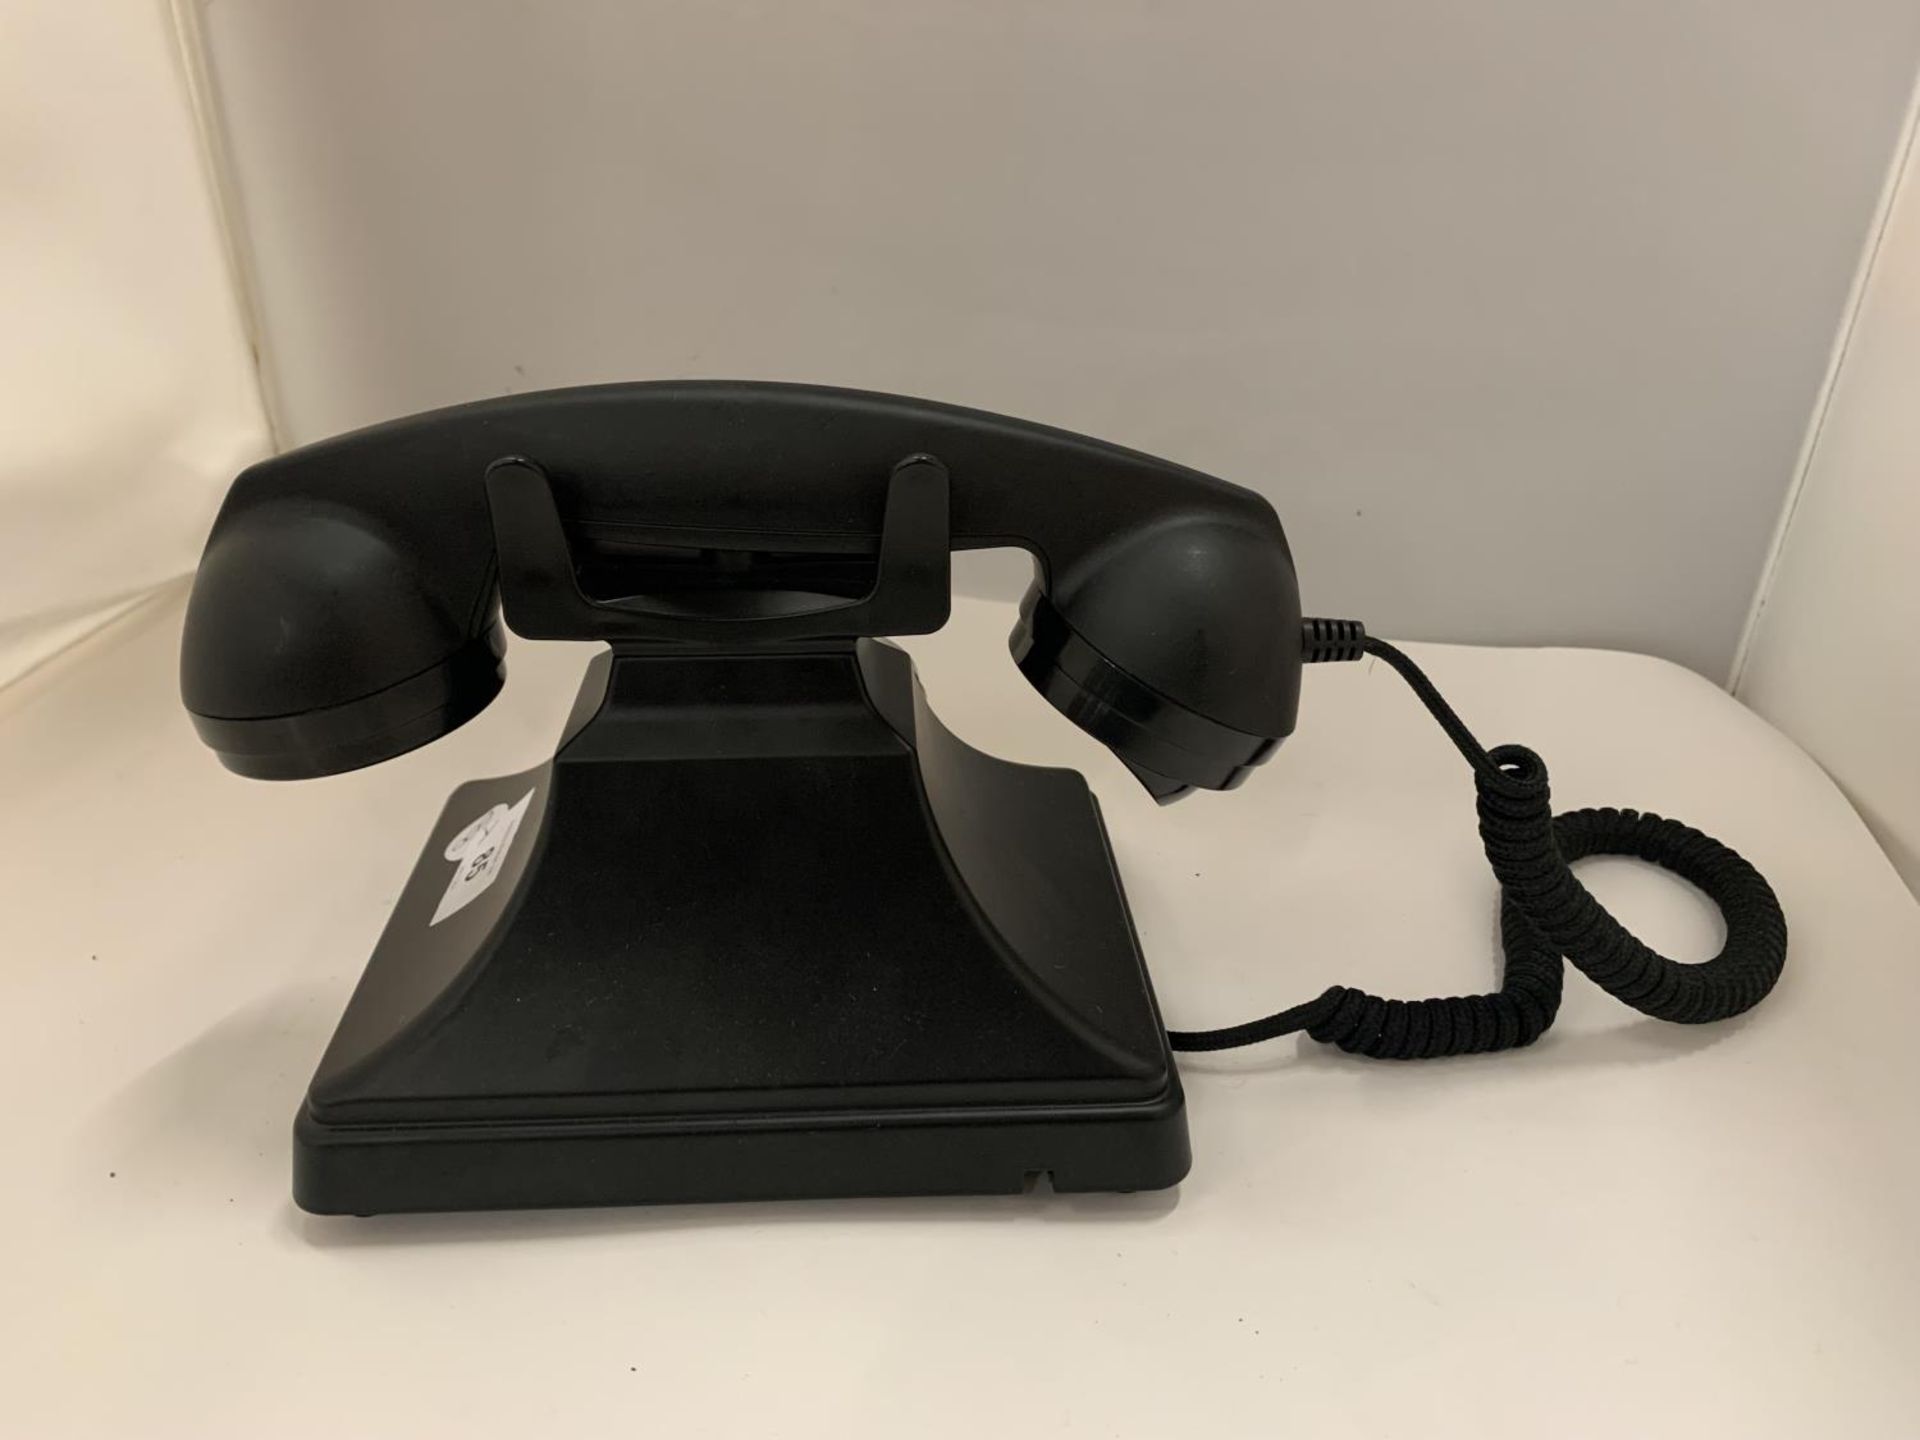 A VINTAGE STYLE ROTARY DIAL TELEPHONE IN MATT BLACK - Image 4 of 4